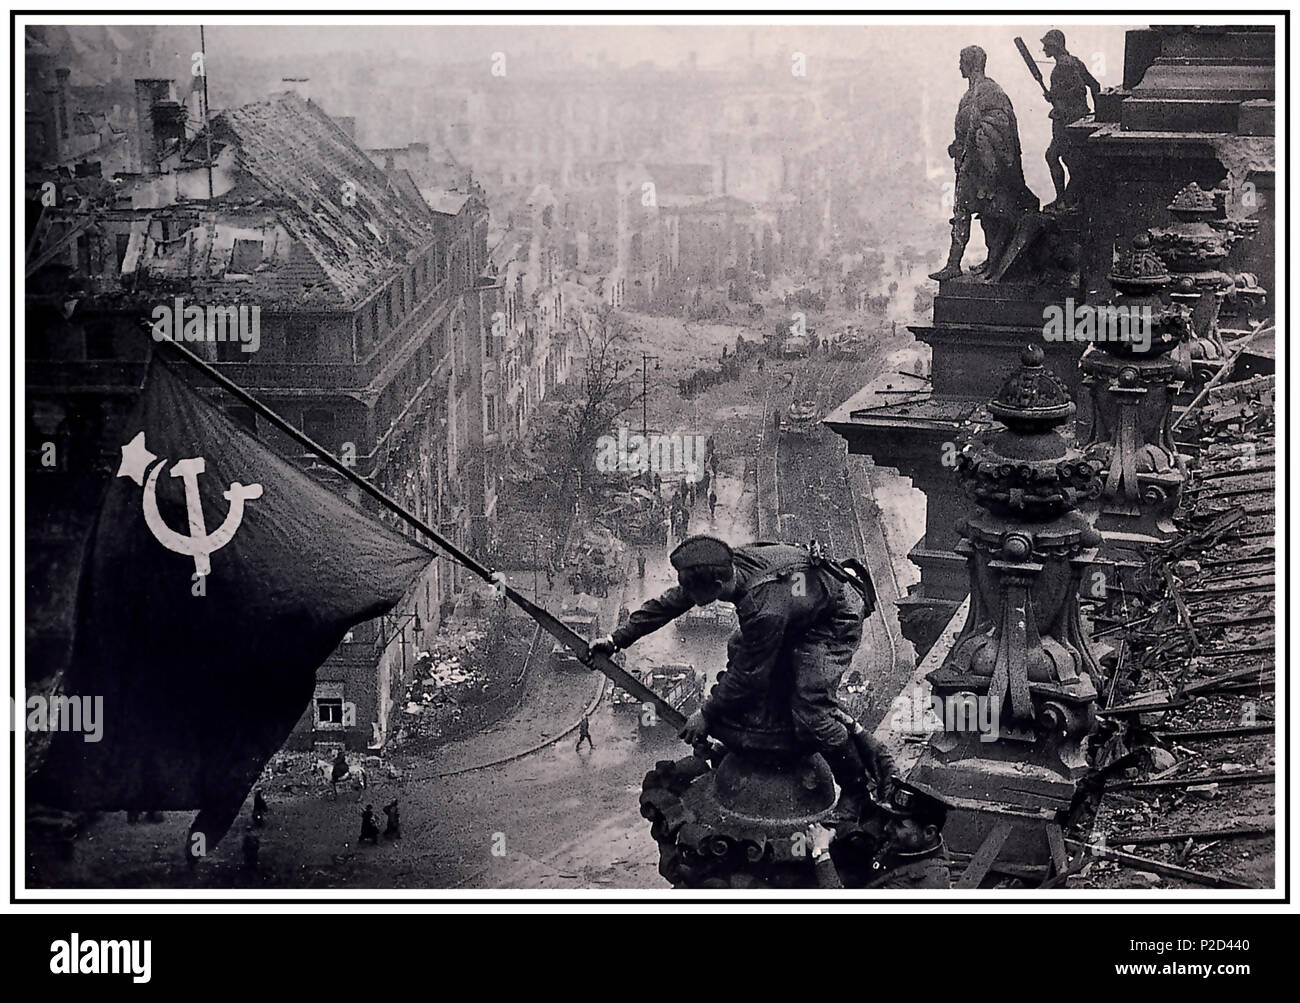 RUSSIAN FLAG BERLIN 1945 REICHSTAG ICONIC World War 2 Germany. Russian soldier raising Soviet Hammer and Sickle flag over the Nazi Reichstag chancellory, a historic World War II photograph, taken during the Battle of Berlin on 2 May 1945. It shows Meliton Kantaria and Mikhail Yegorov raising the Soviet flag over the former Nazi Germany seat of power, the Berlin Reichstag Berlin Germany.. Archive image digitally restored and processed to its original impact and quality potential. Stock Photo